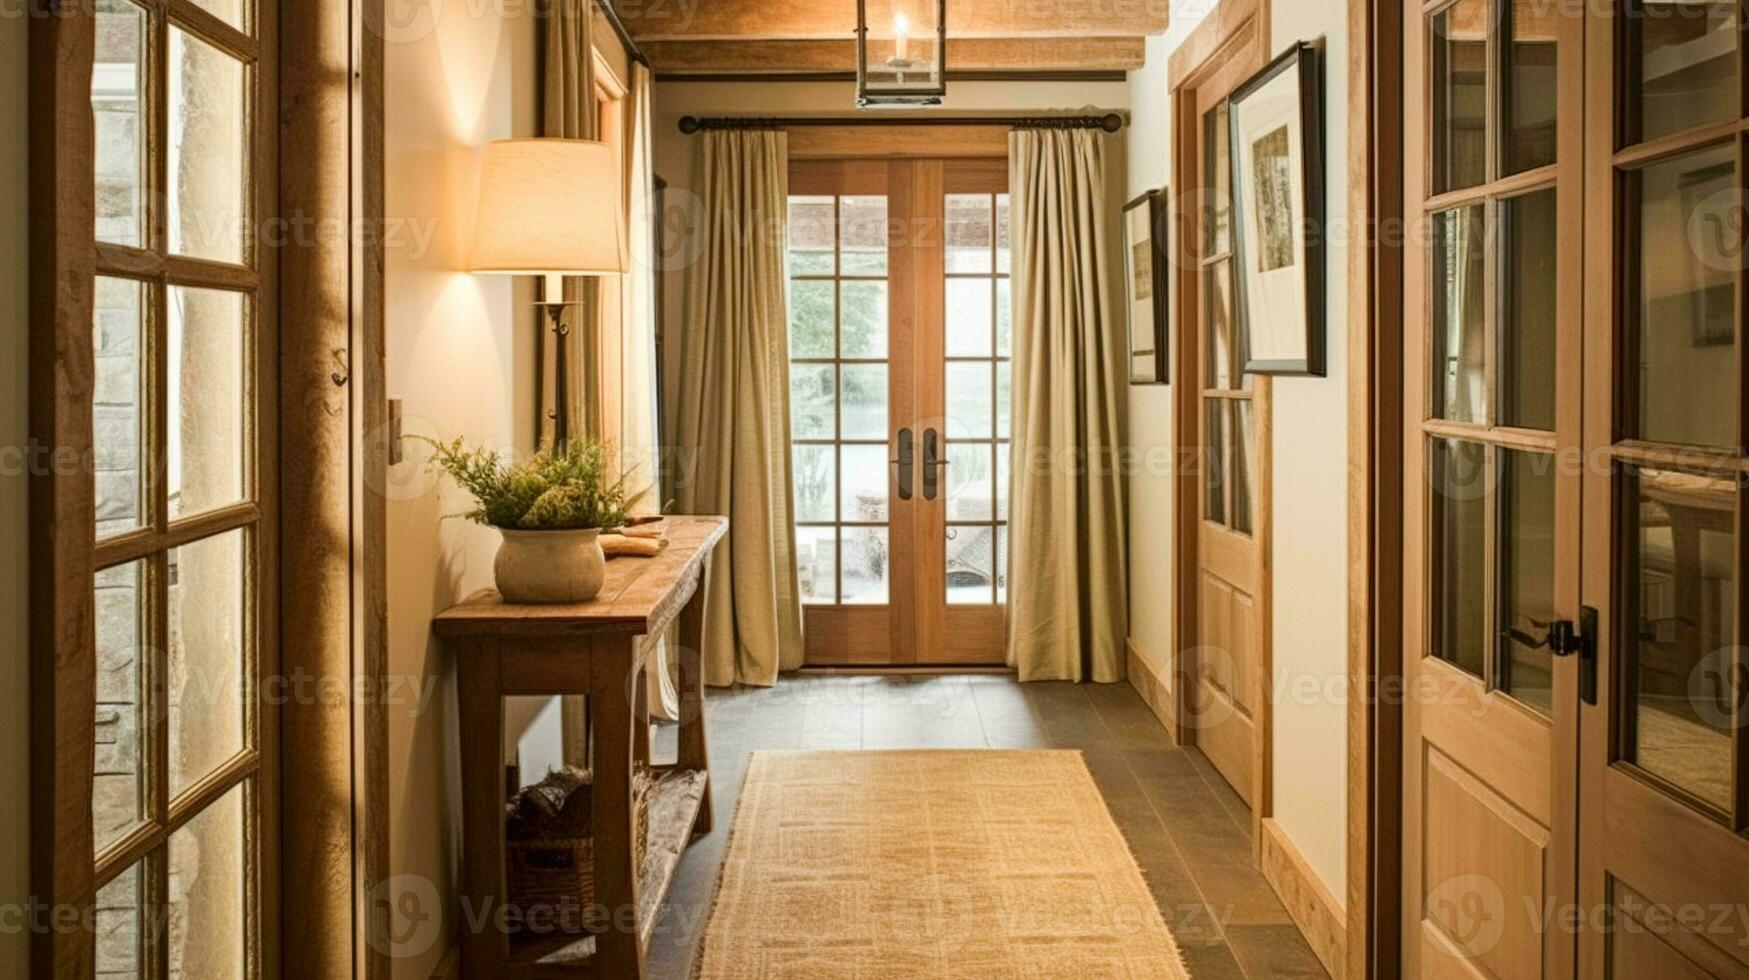 https://static.vecteezy.com/system/resources/previews/029/197/389/non_2x/farmhouse-hallway-decor-interior-design-and-home-decor-entryway-furniture-stairway-and-entrance-hall-in-an-english-country-house-and-cottage-style-photo.jpg